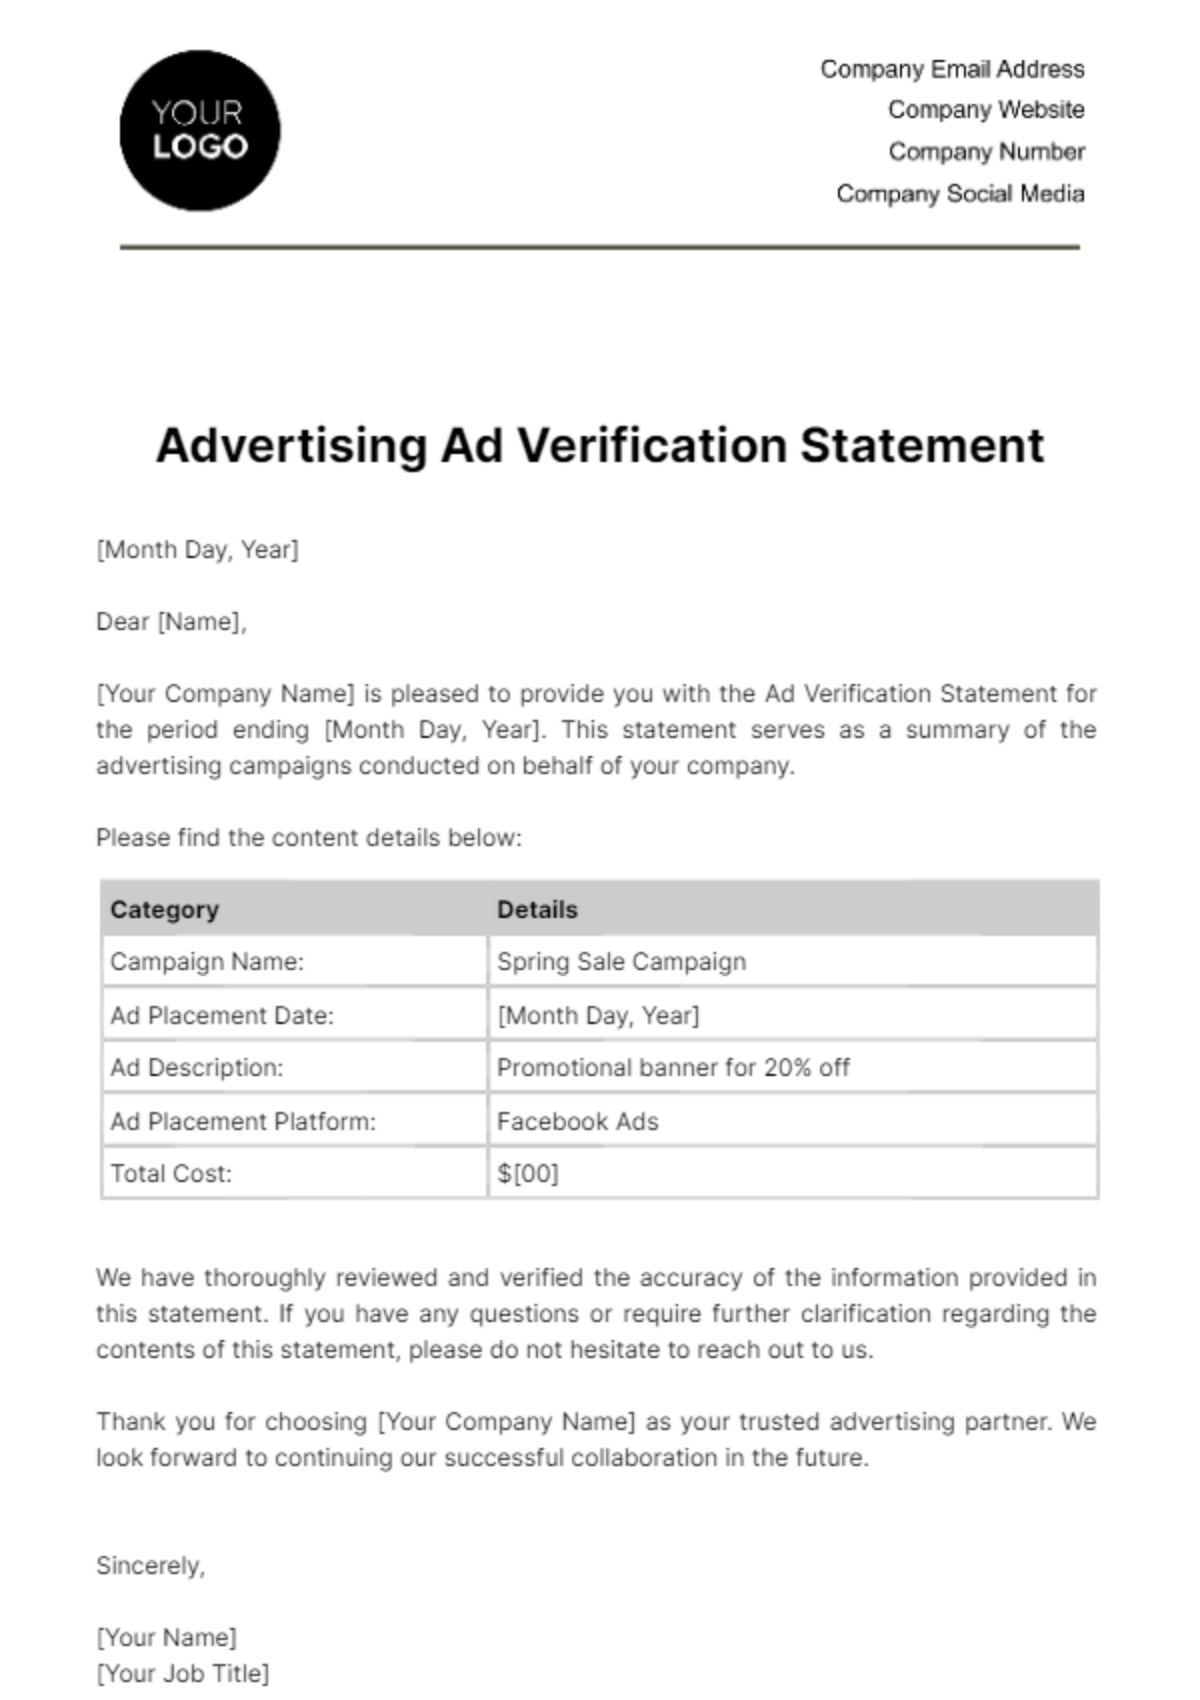 Free Advertising Ad Verification Statement Template